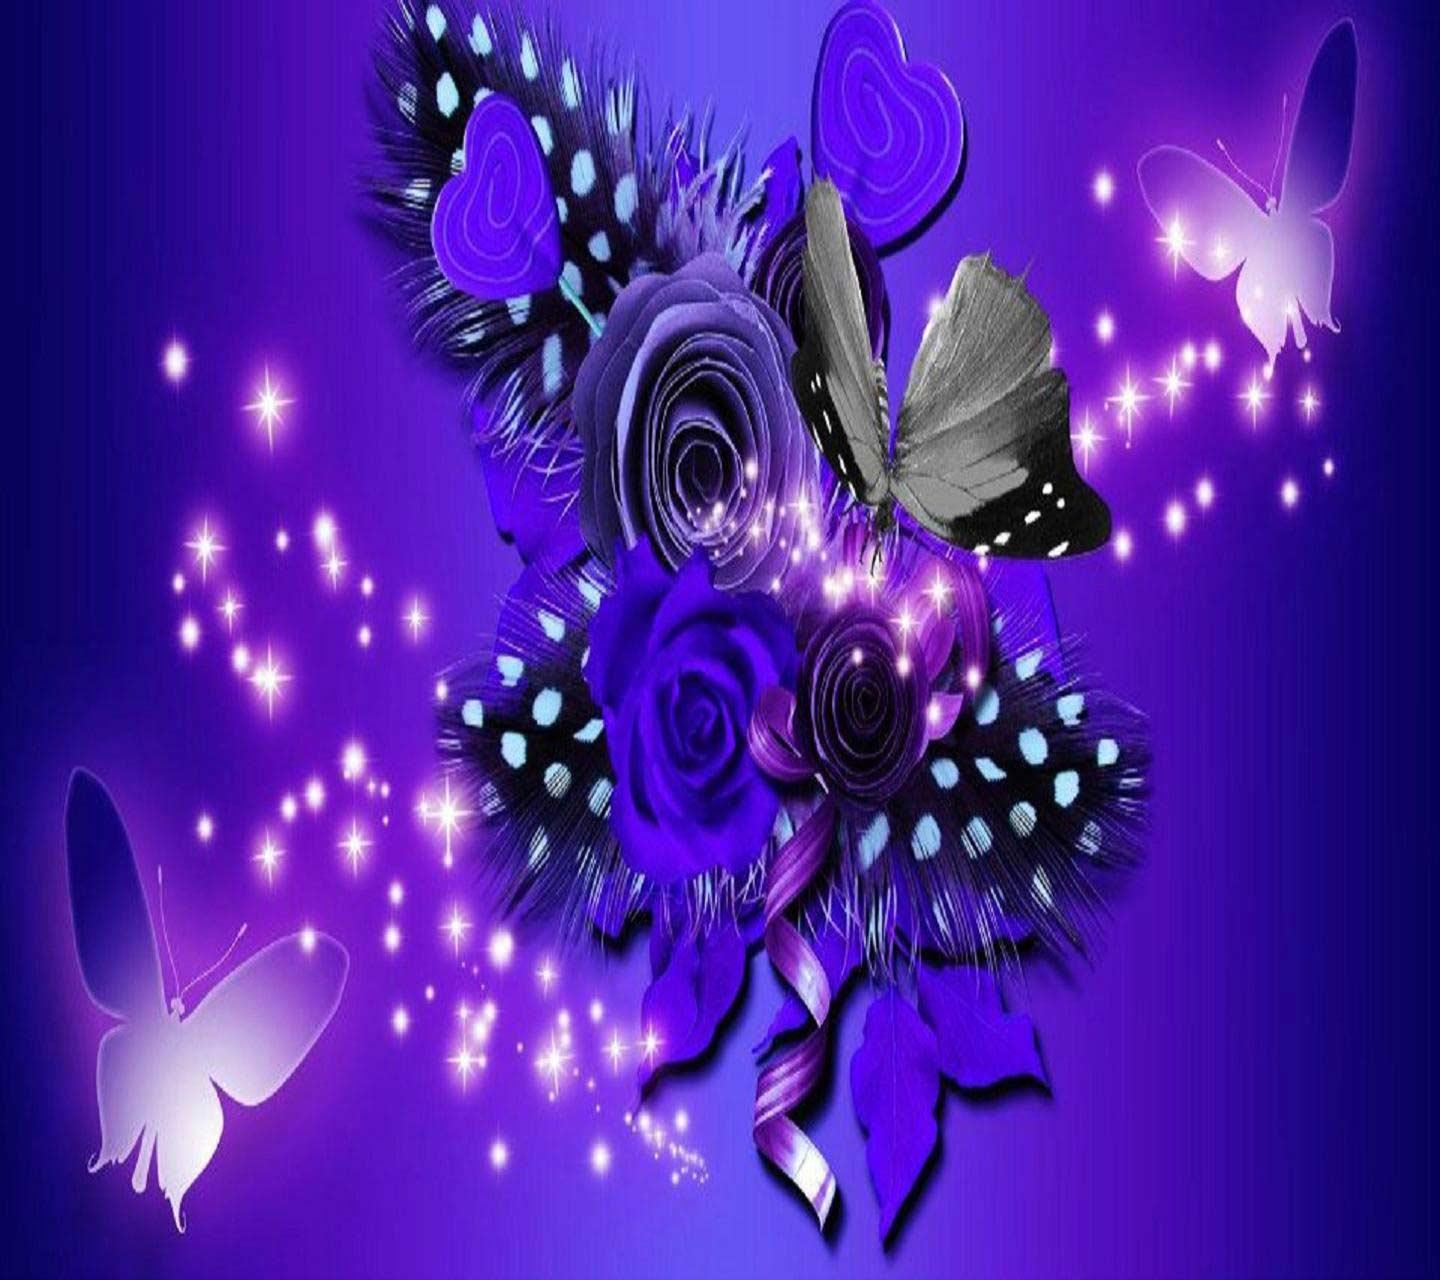 Butterfly Wallpapers Share para Android - APK Descargar